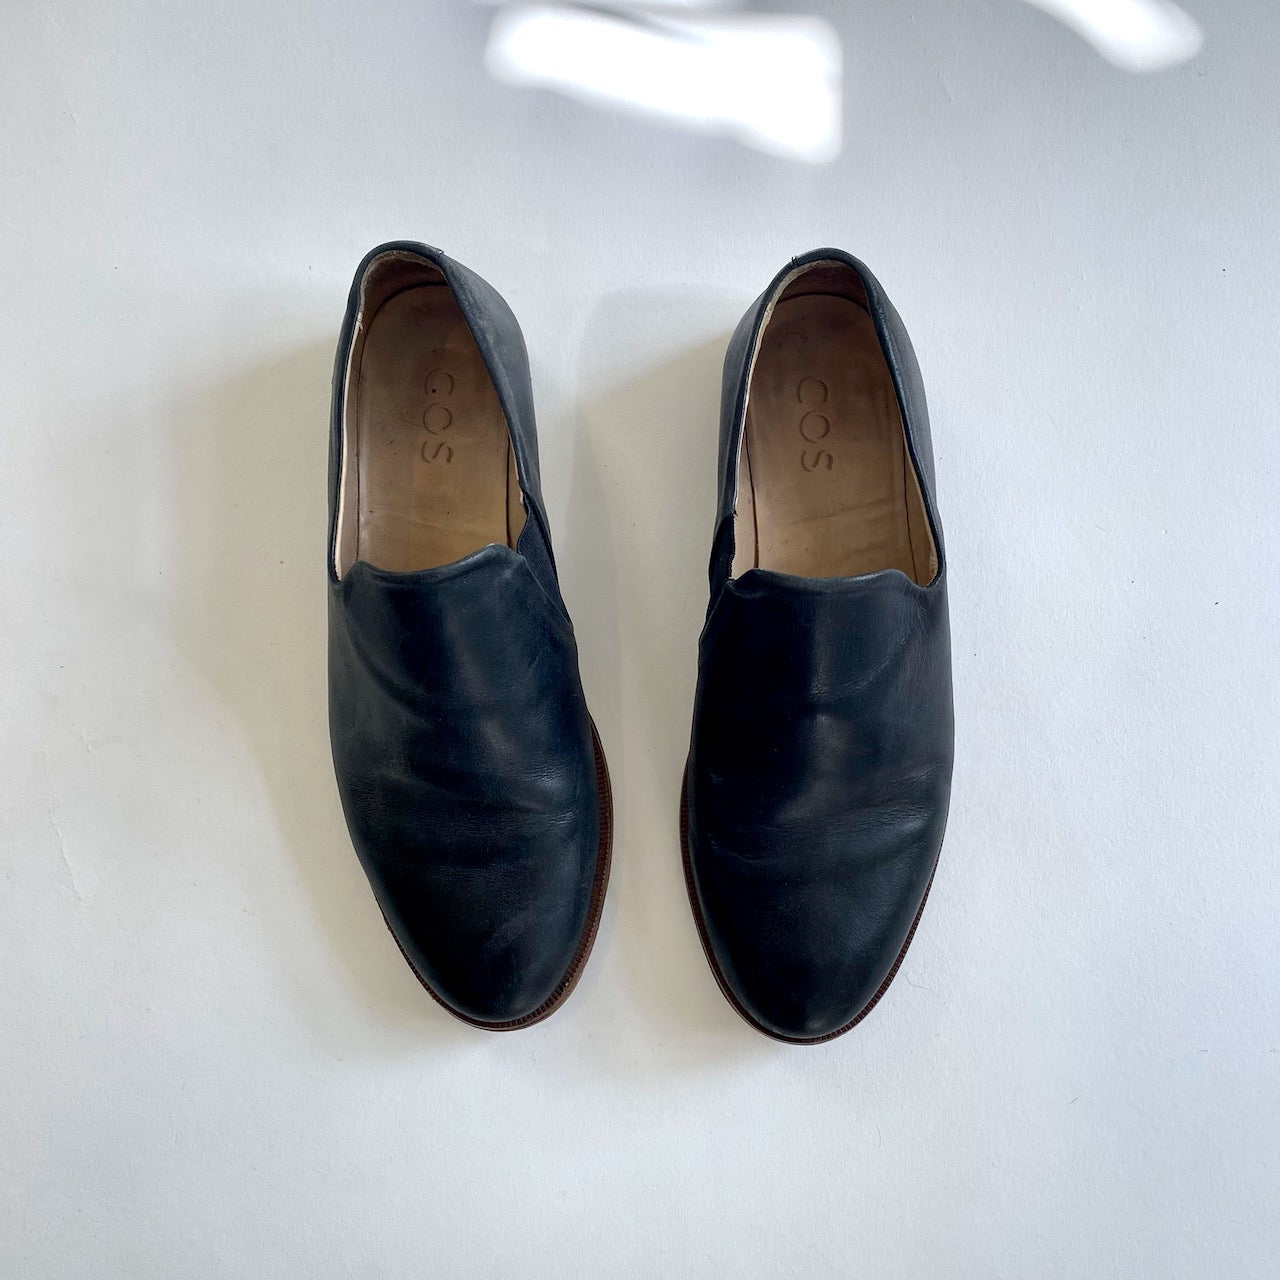 LEATHER LOAFERS - BLACK - COS